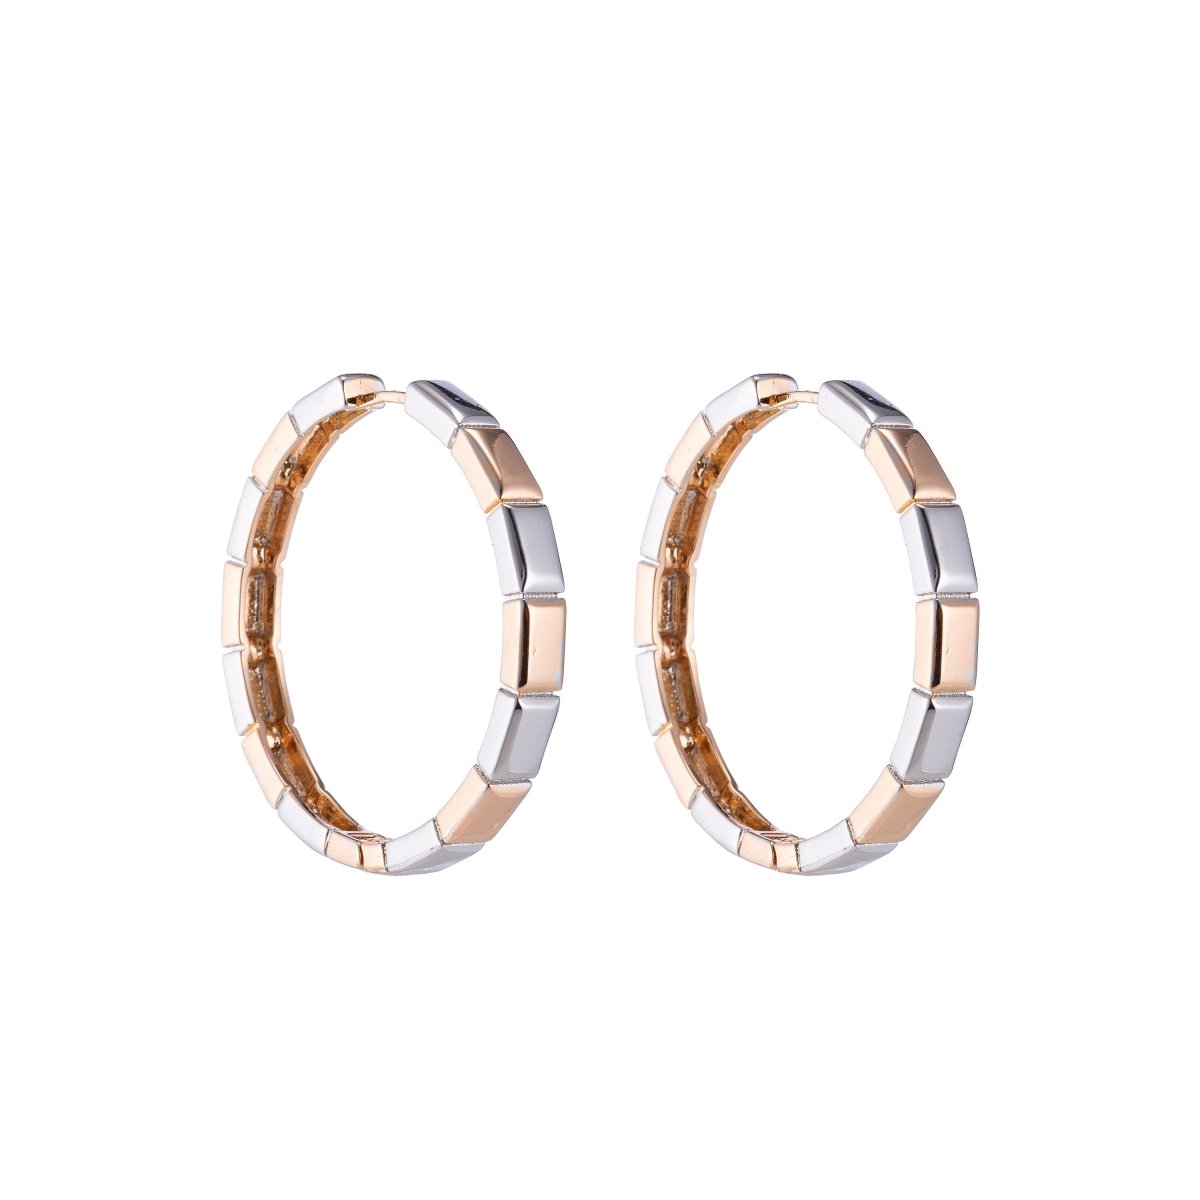 CZ Huggie Hoop earring, Gold Filled Hoop earring, Minimalistic Jewelry; Elegant, Modern, Chic, Classic, Everyday, All Occasion Purpose - DLUXCA